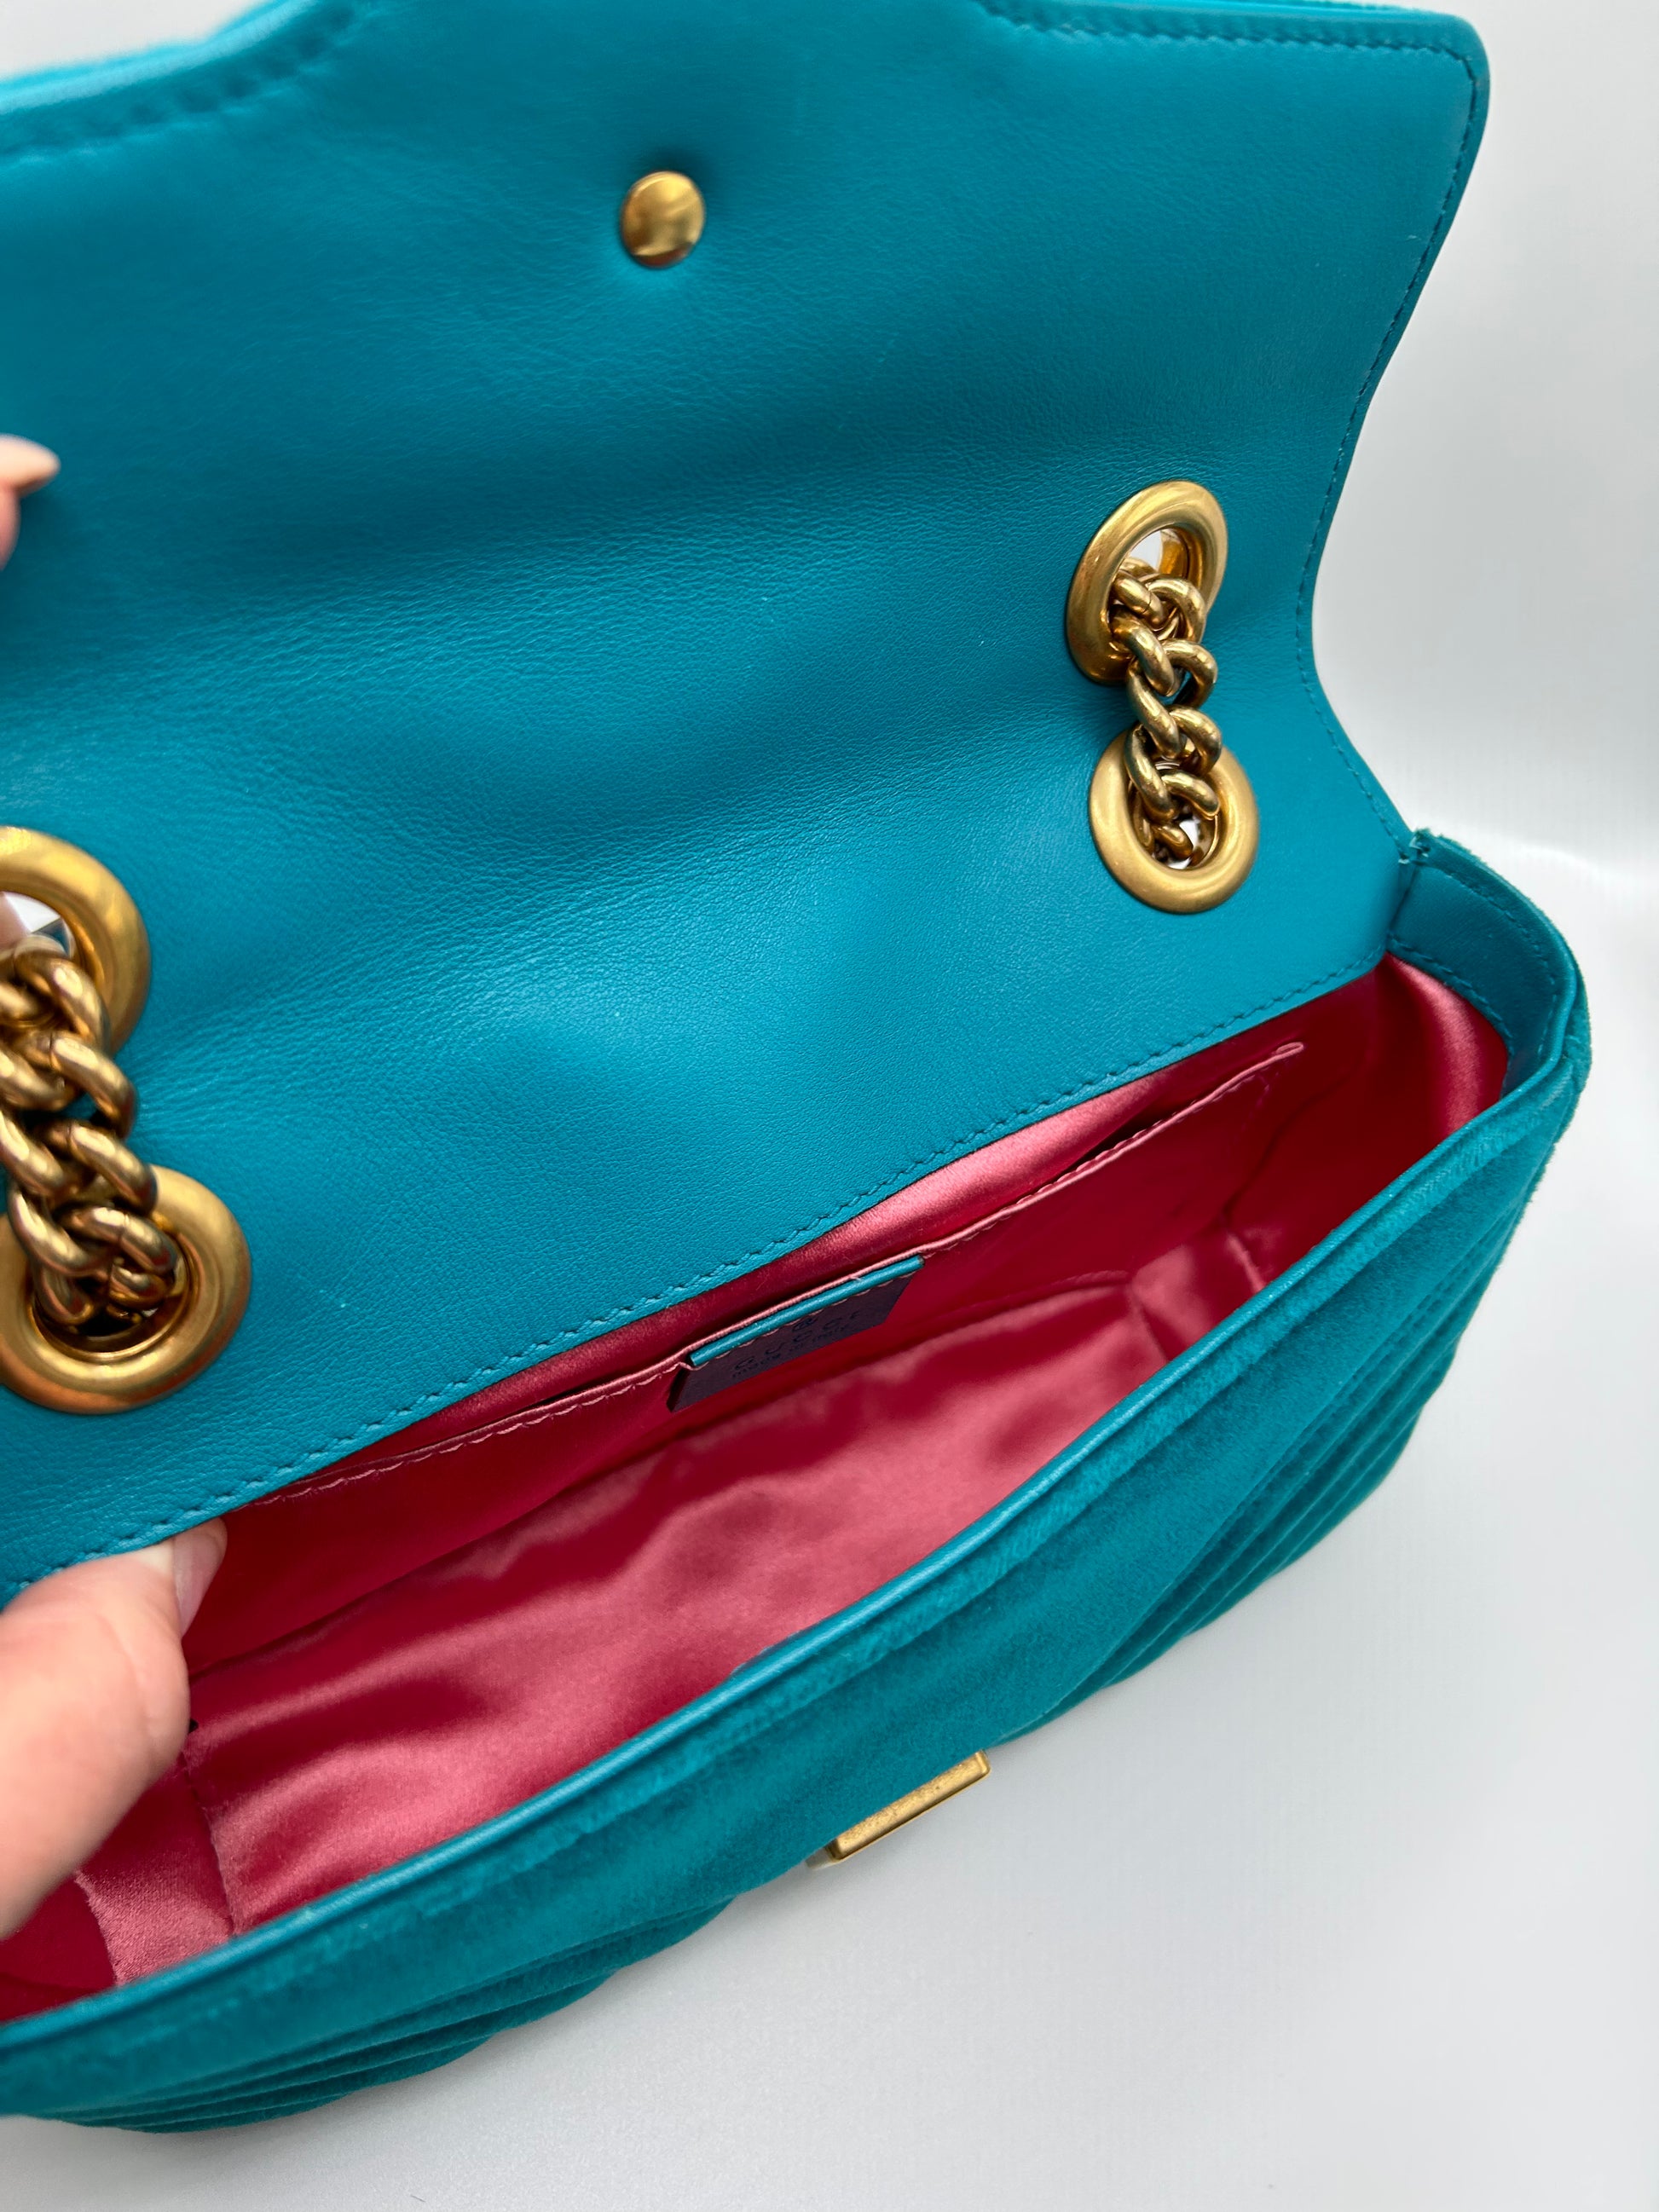 Gucci Marmont Velvet Turquoise Mini – Preloved Luxe